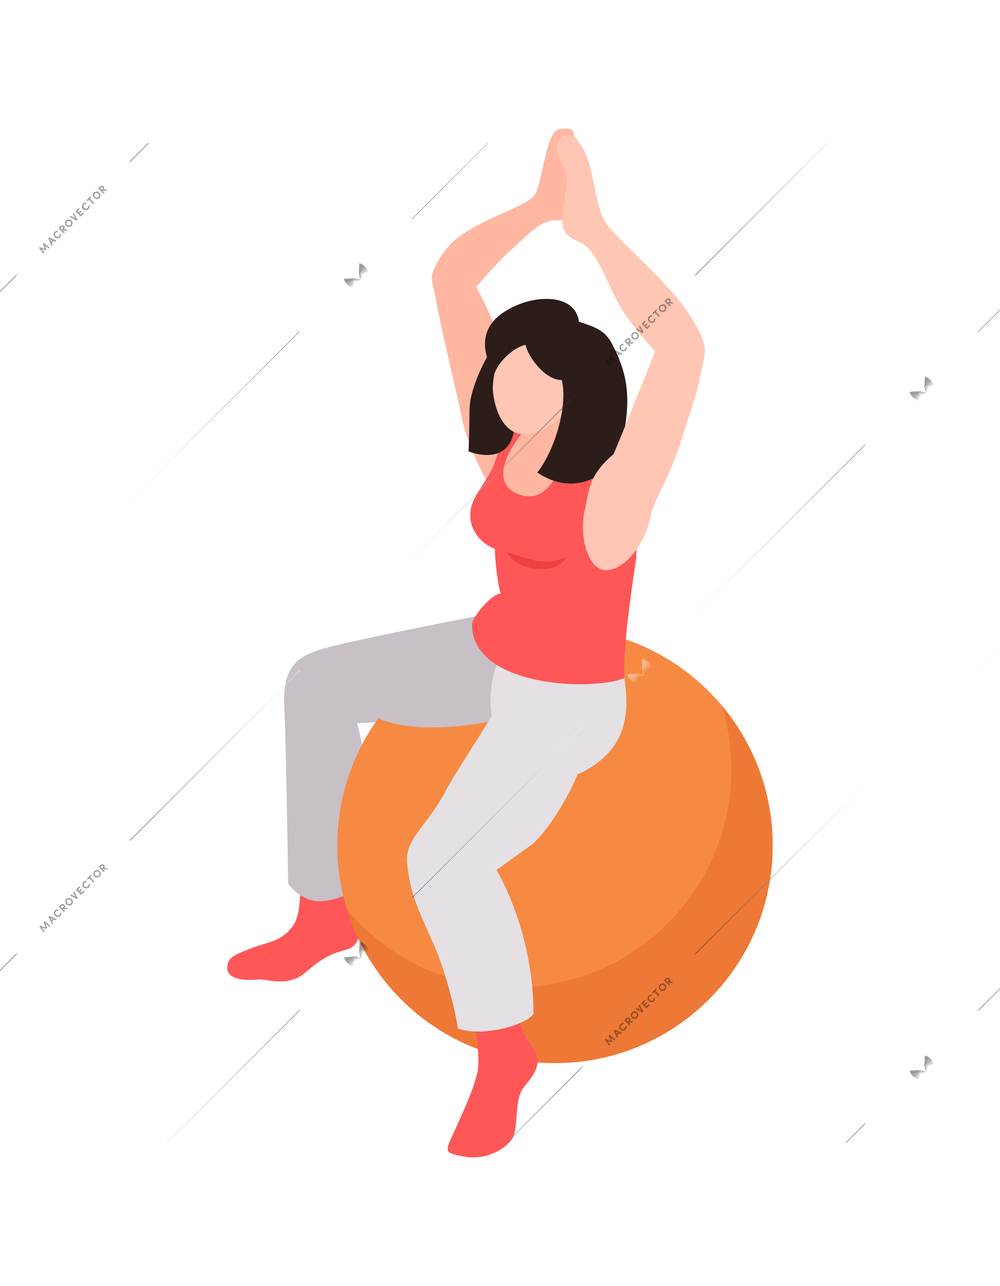 Isometric rehabilitation icon with woman exercising on fitball 3d vector illustration